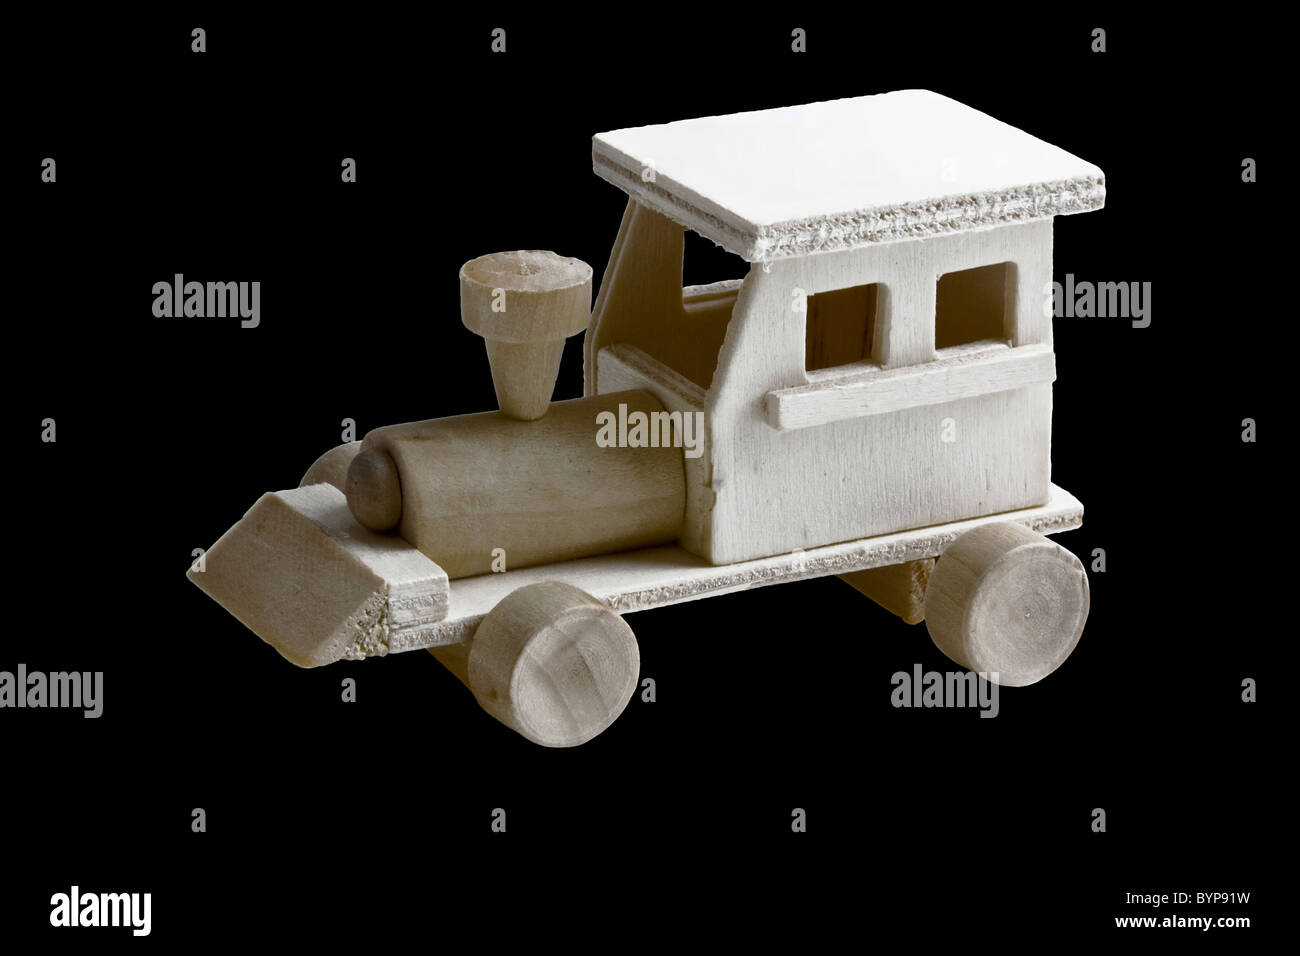 Wooden toy toy with wheels on black background Stock Photo